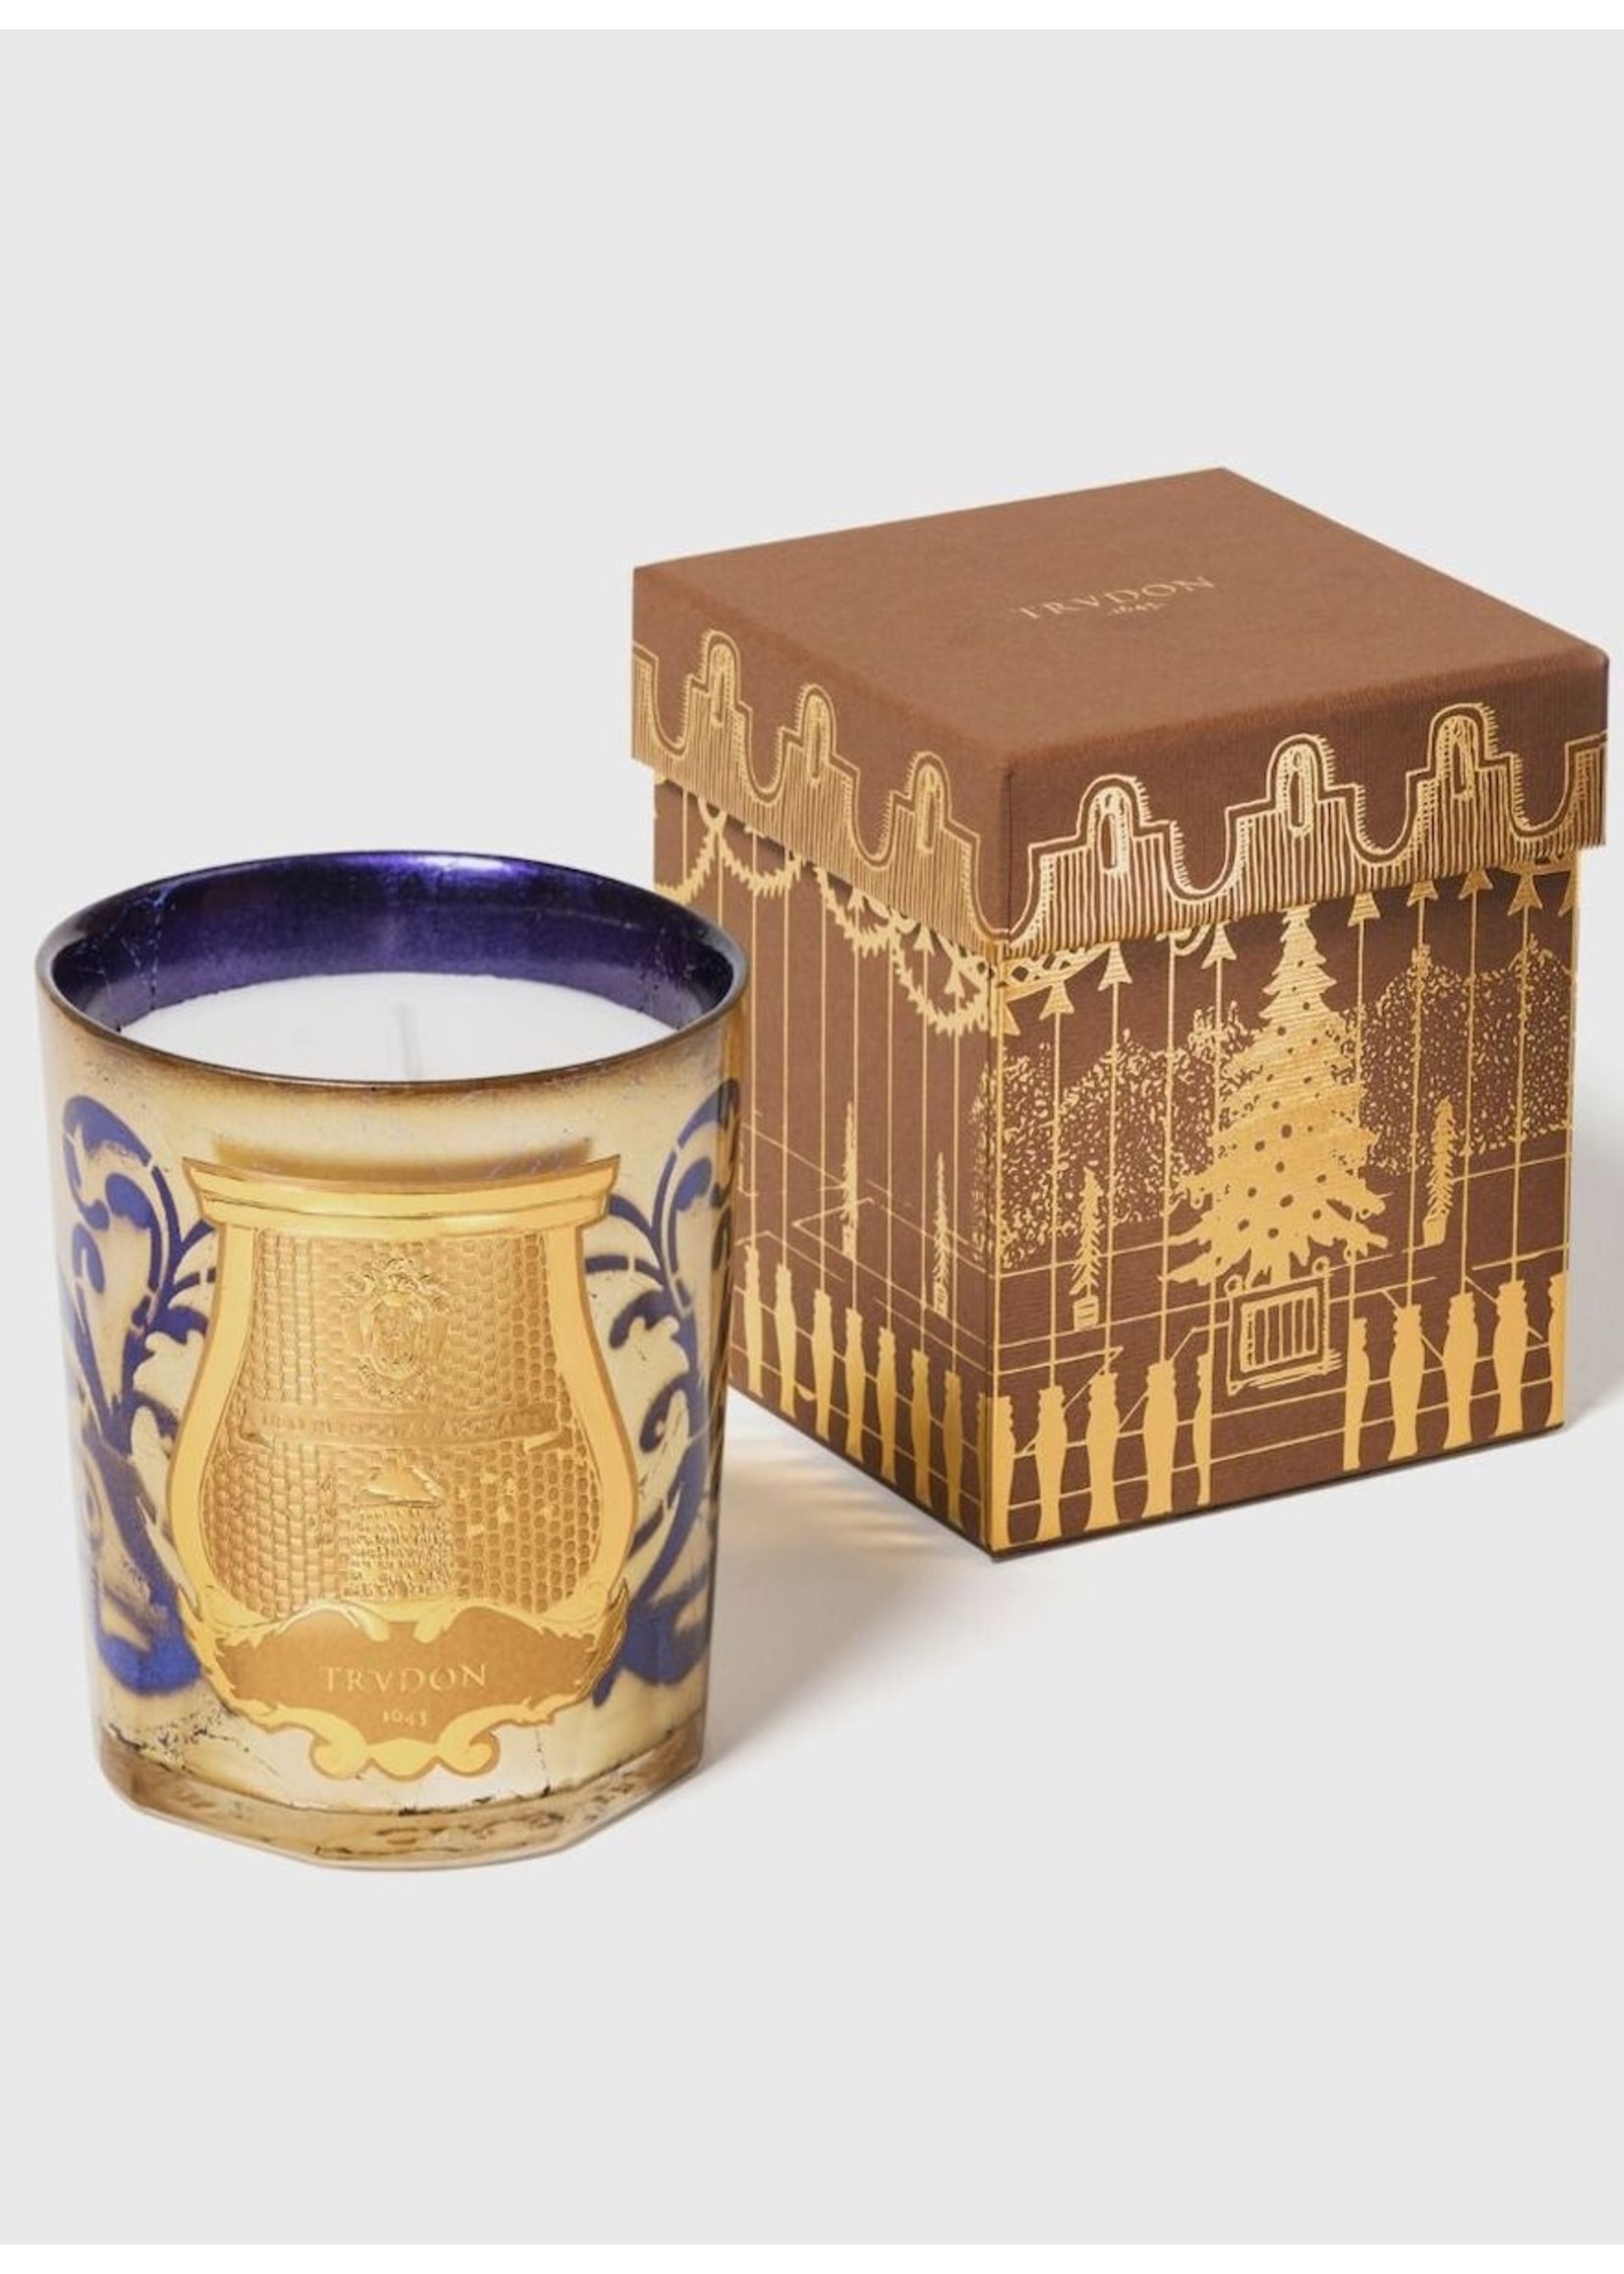 TRUDON TRUDON Noel Candle Collection